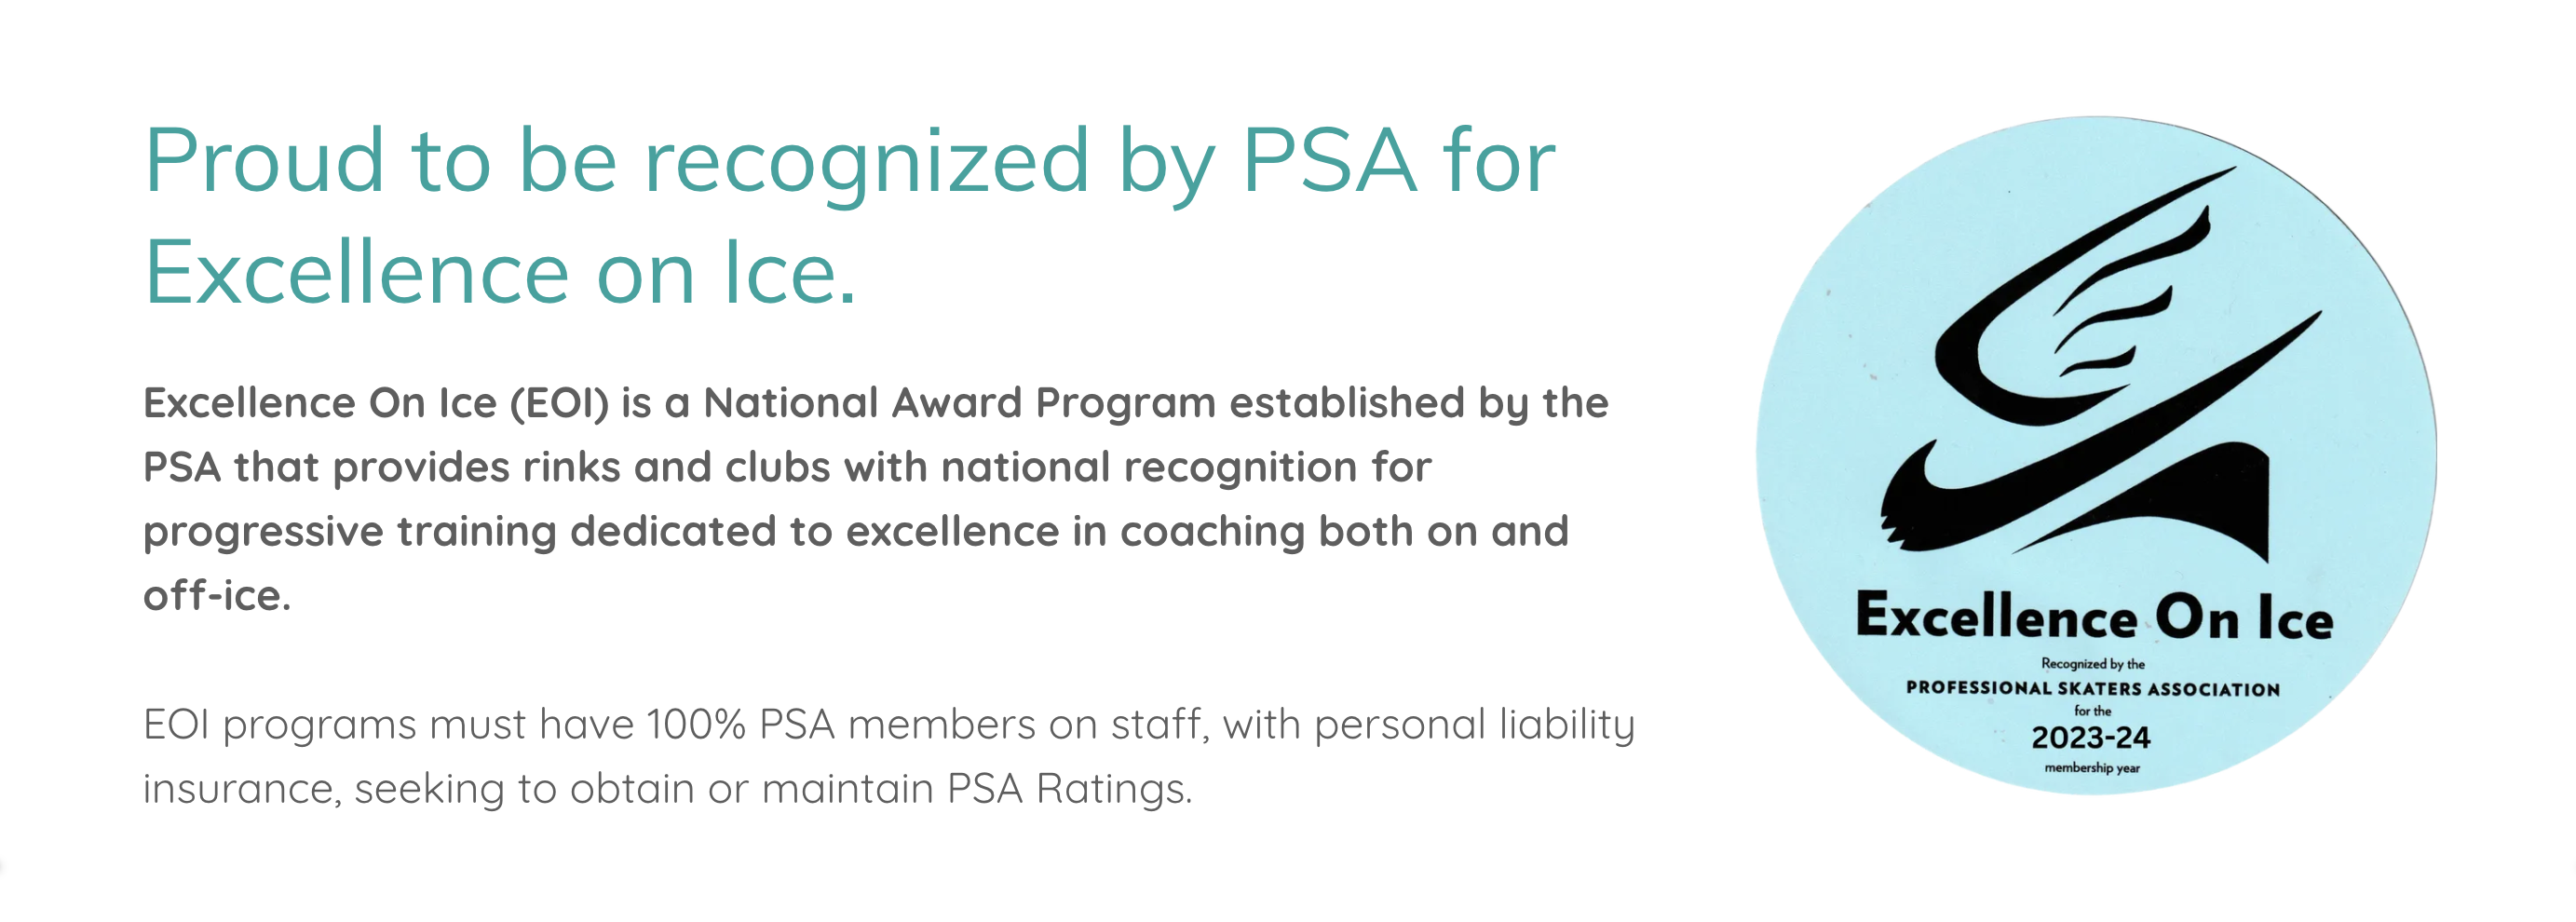 Coach Aimee Skating Academy is Proud to be Recognized by PSA for Excellence on Ice!